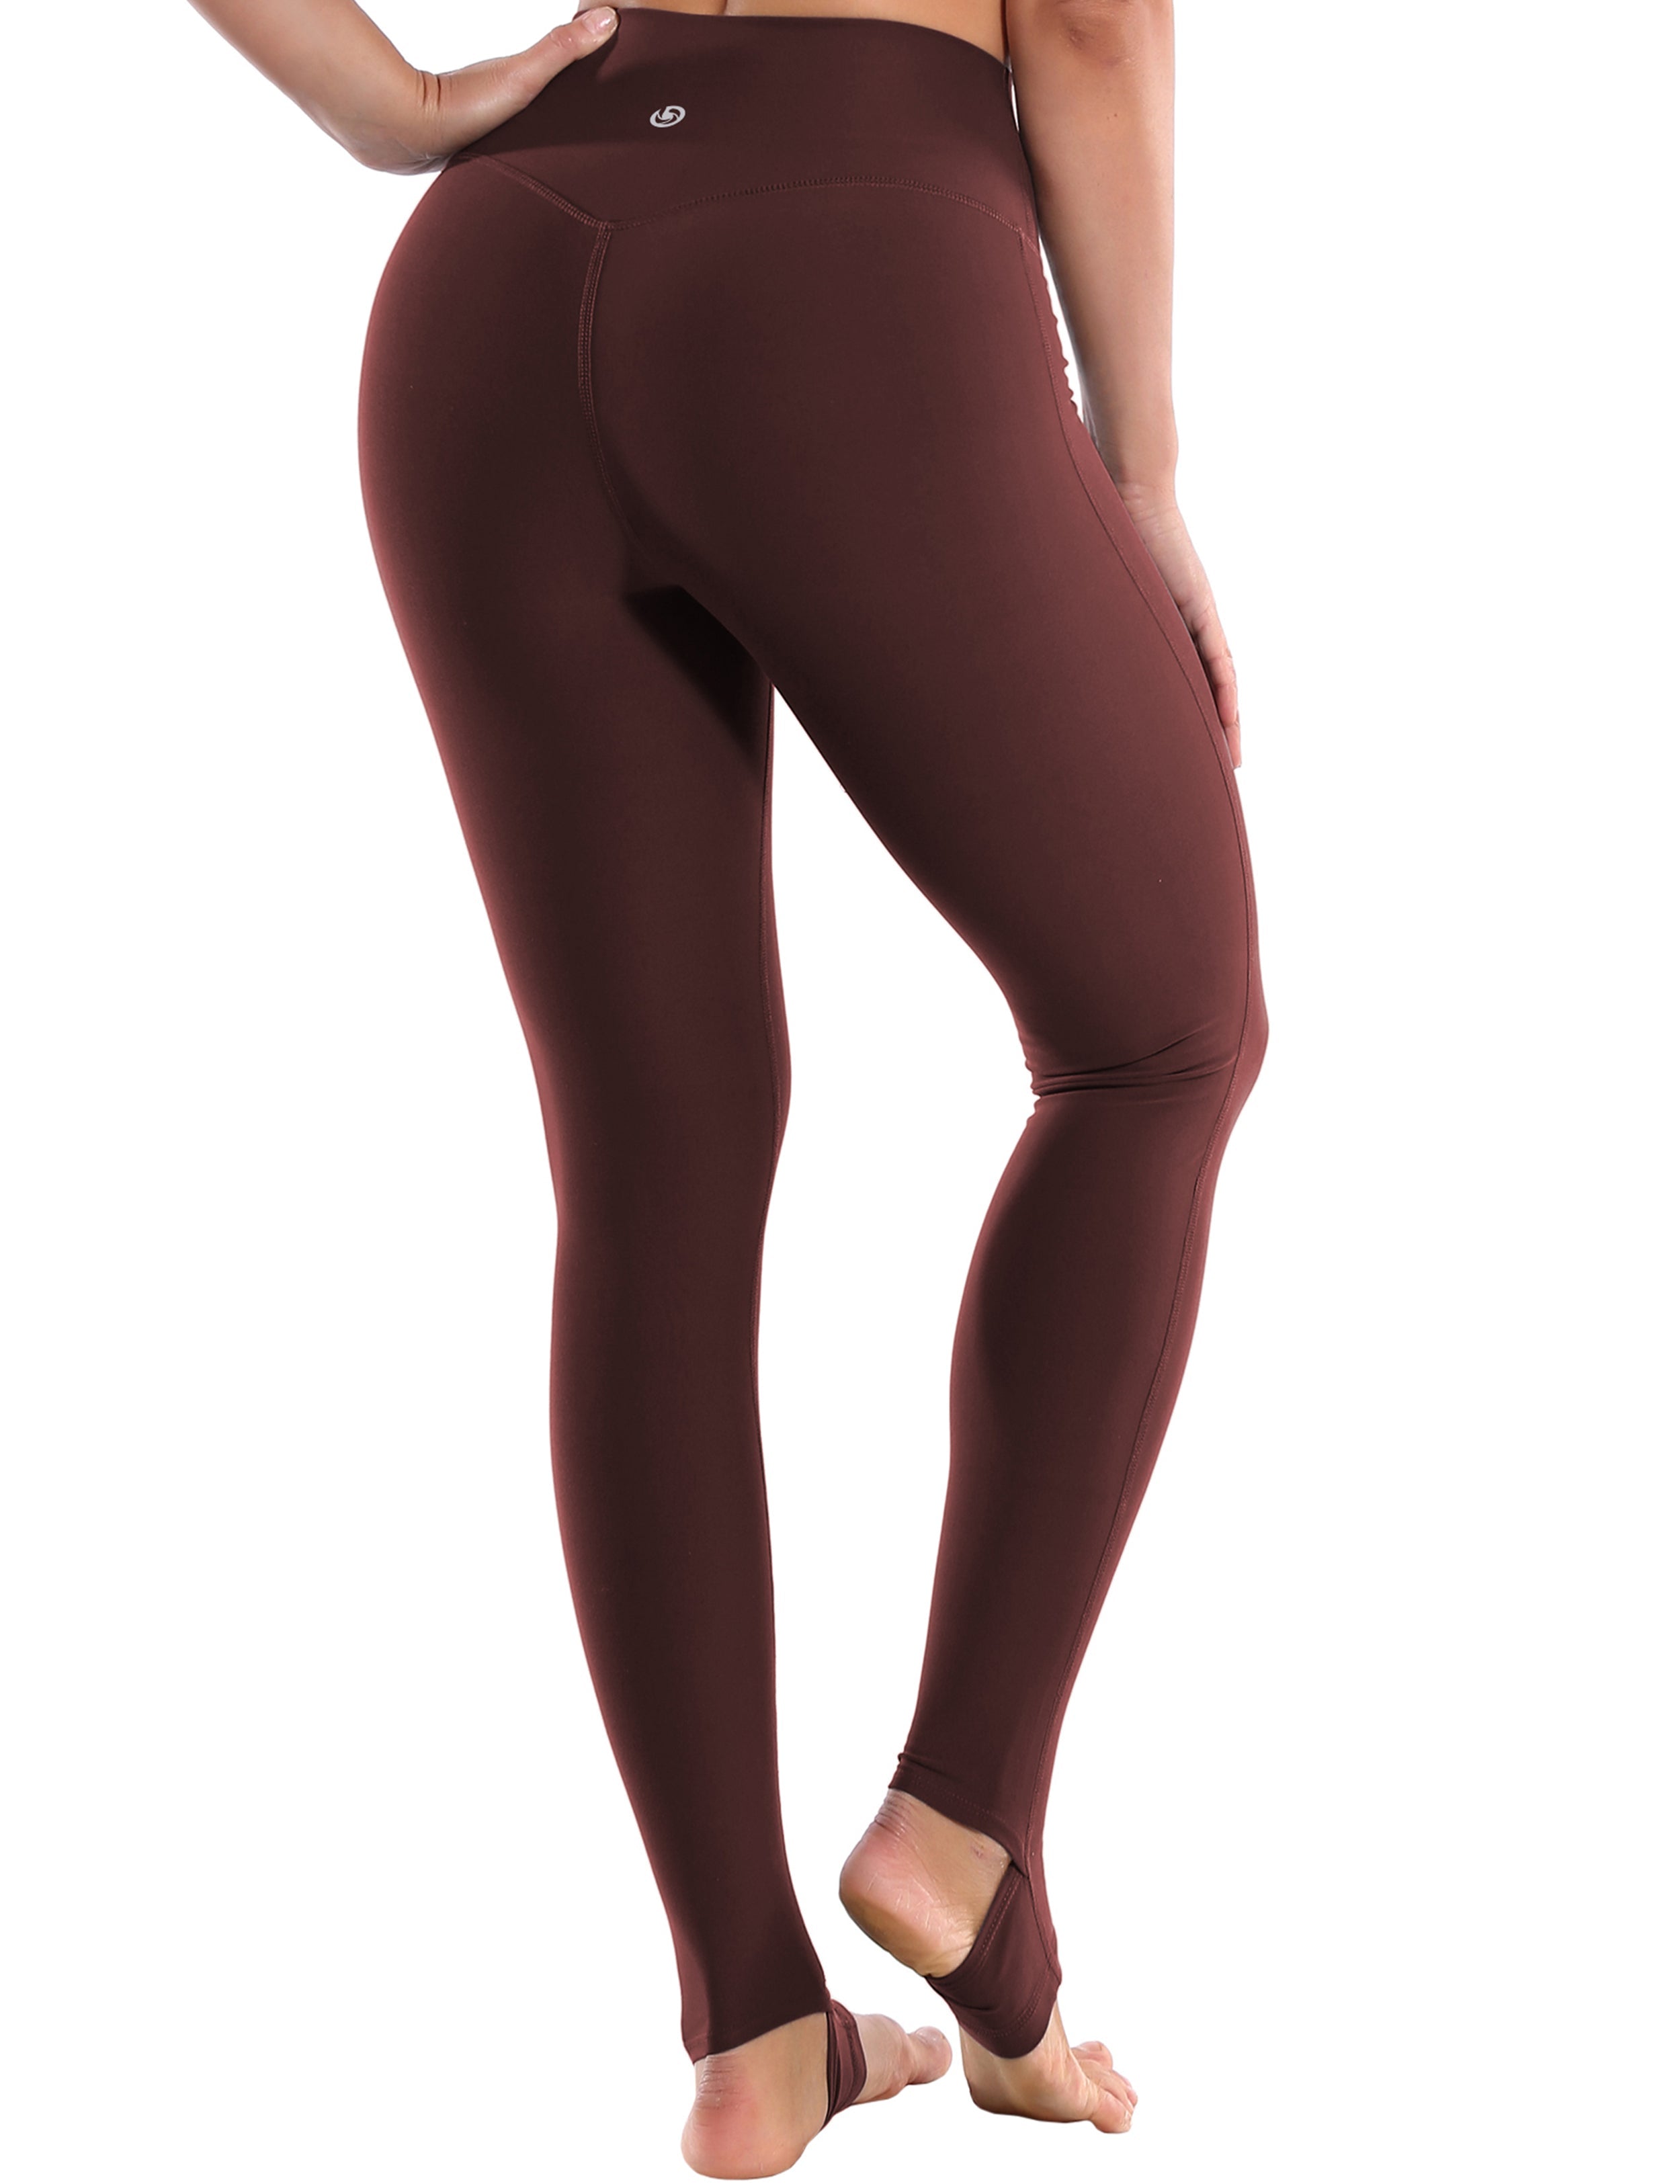 Over the Heel Jogging Pants mahoganymaroon Over the Heel Design 87%Nylon/13%Spandex Fabric doesn't attract lint easily 4-way stretch No see-through Moisture-wicking Tummy control